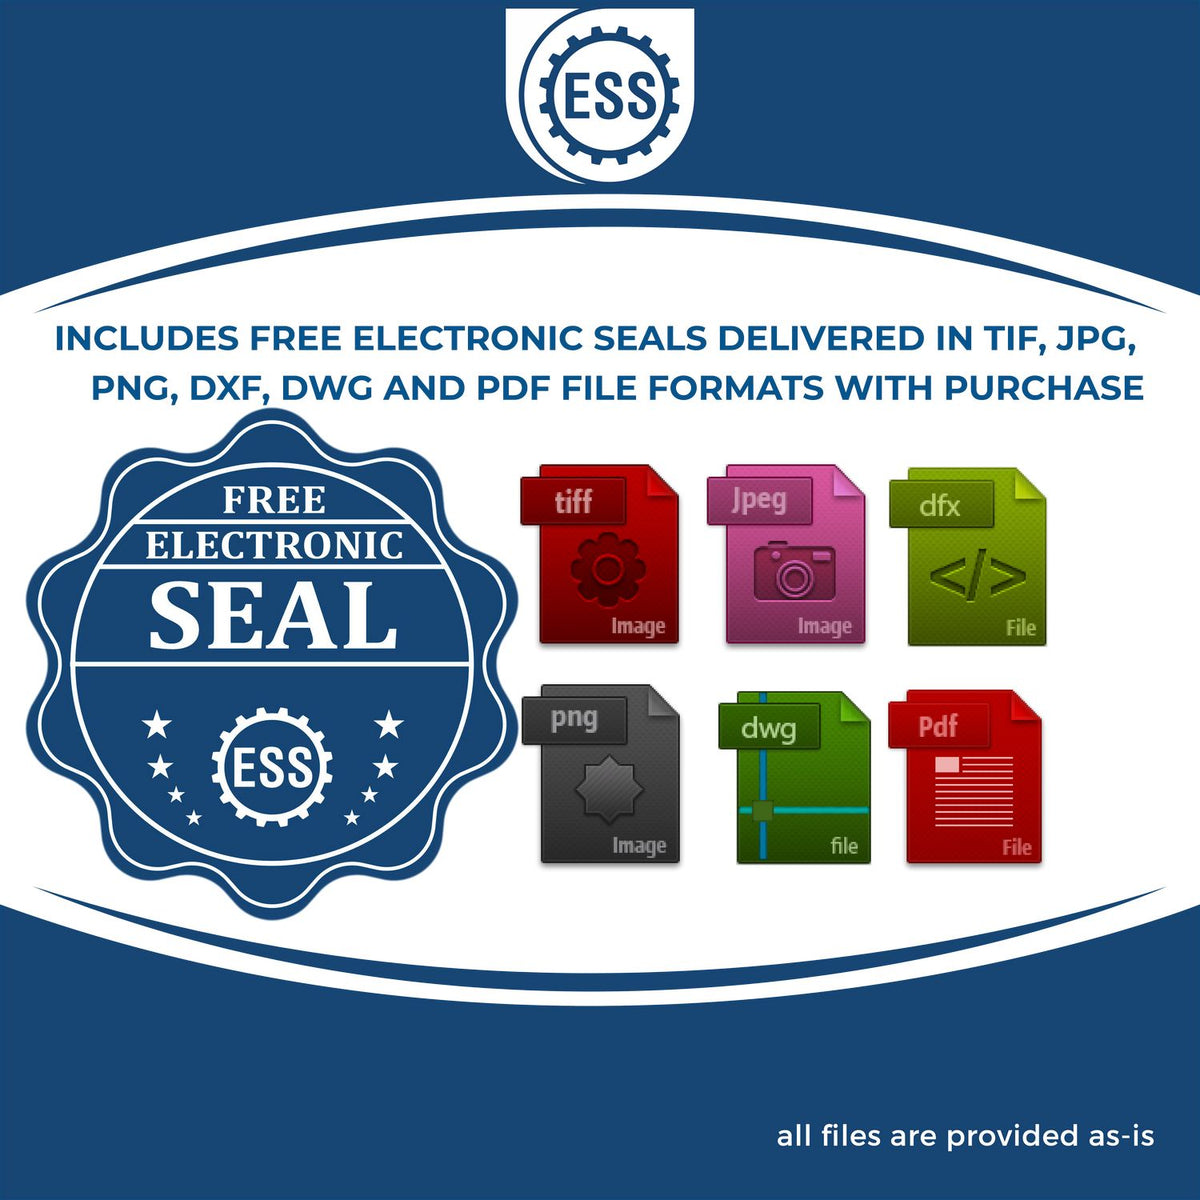 An infographic for the free electronic seal for the Gift Tennessee Engineer Seal illustrating the different file type icons such as DXF, DWG, TIF, JPG and PNG.